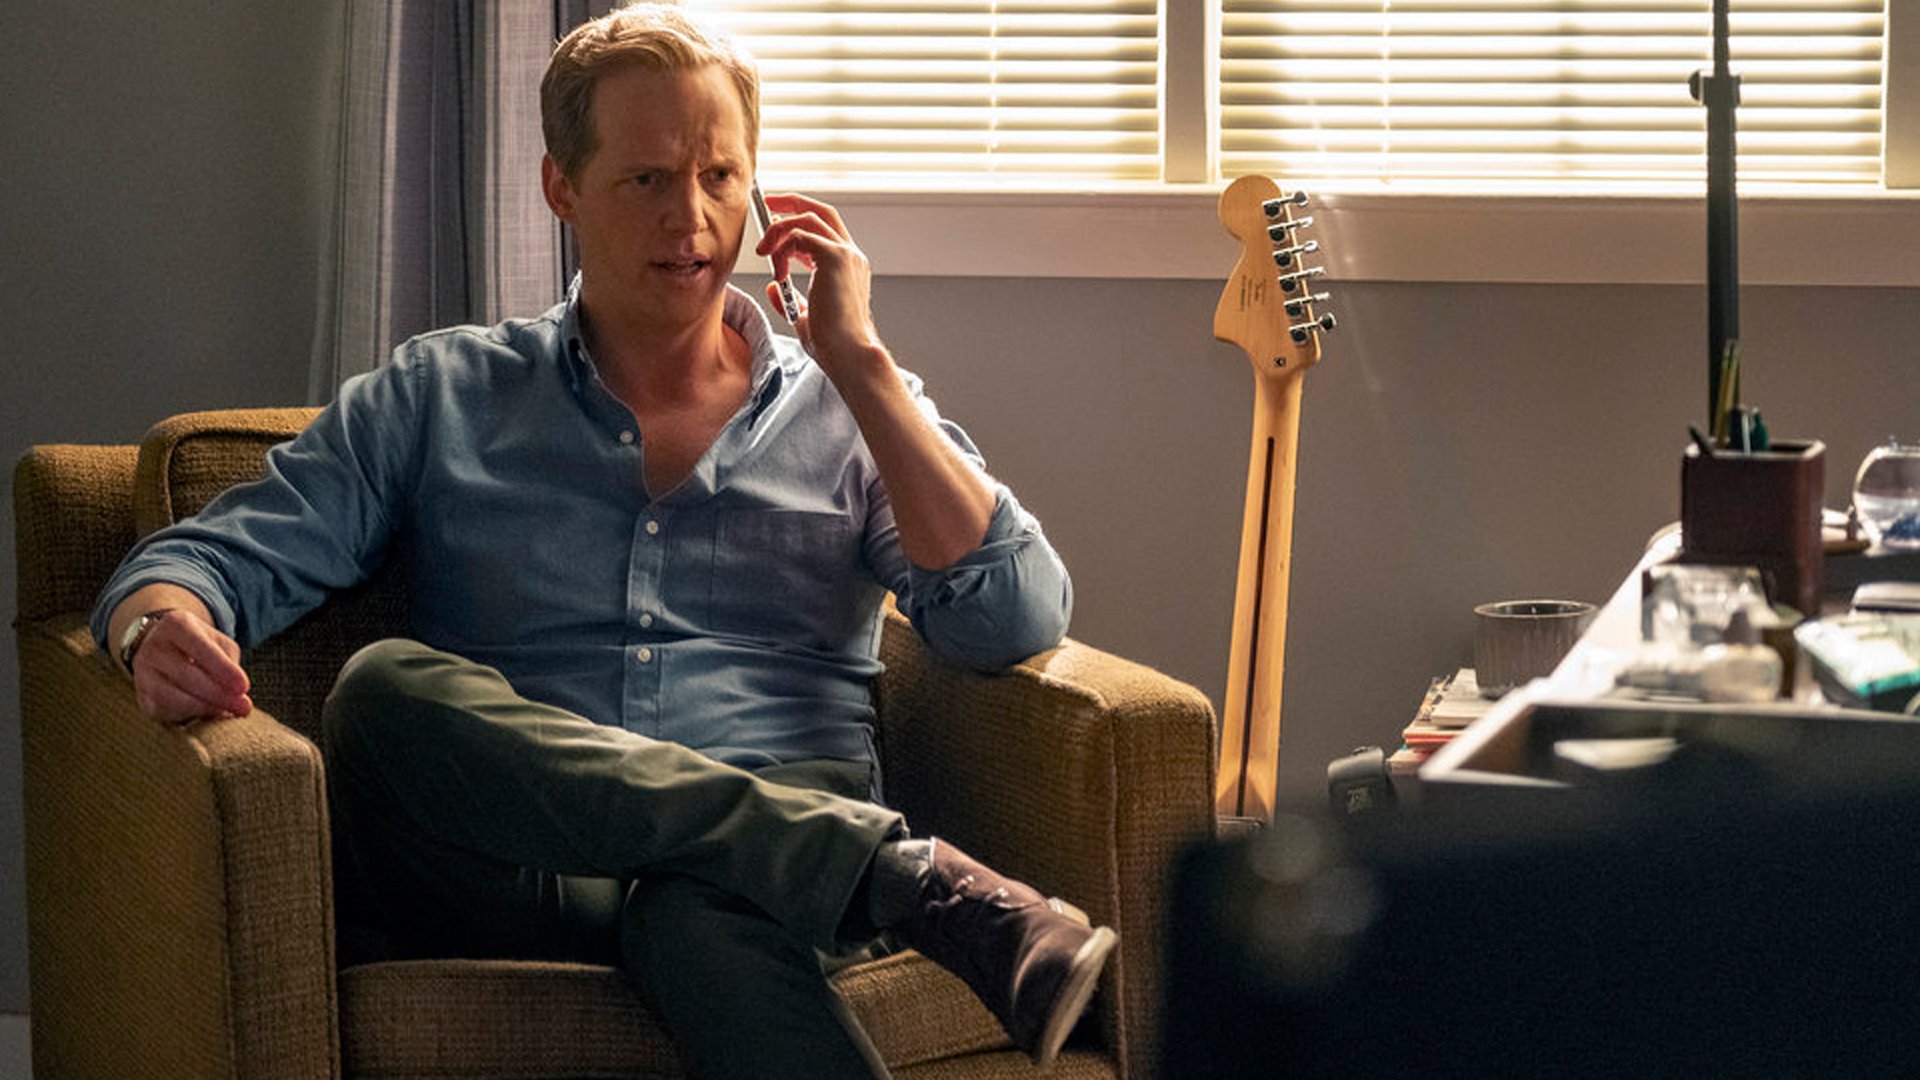 Chris Geere as Phillip talking on the phone in ‘This Is Us’ Season 5 Episode 16, ‘The Adirondacks’